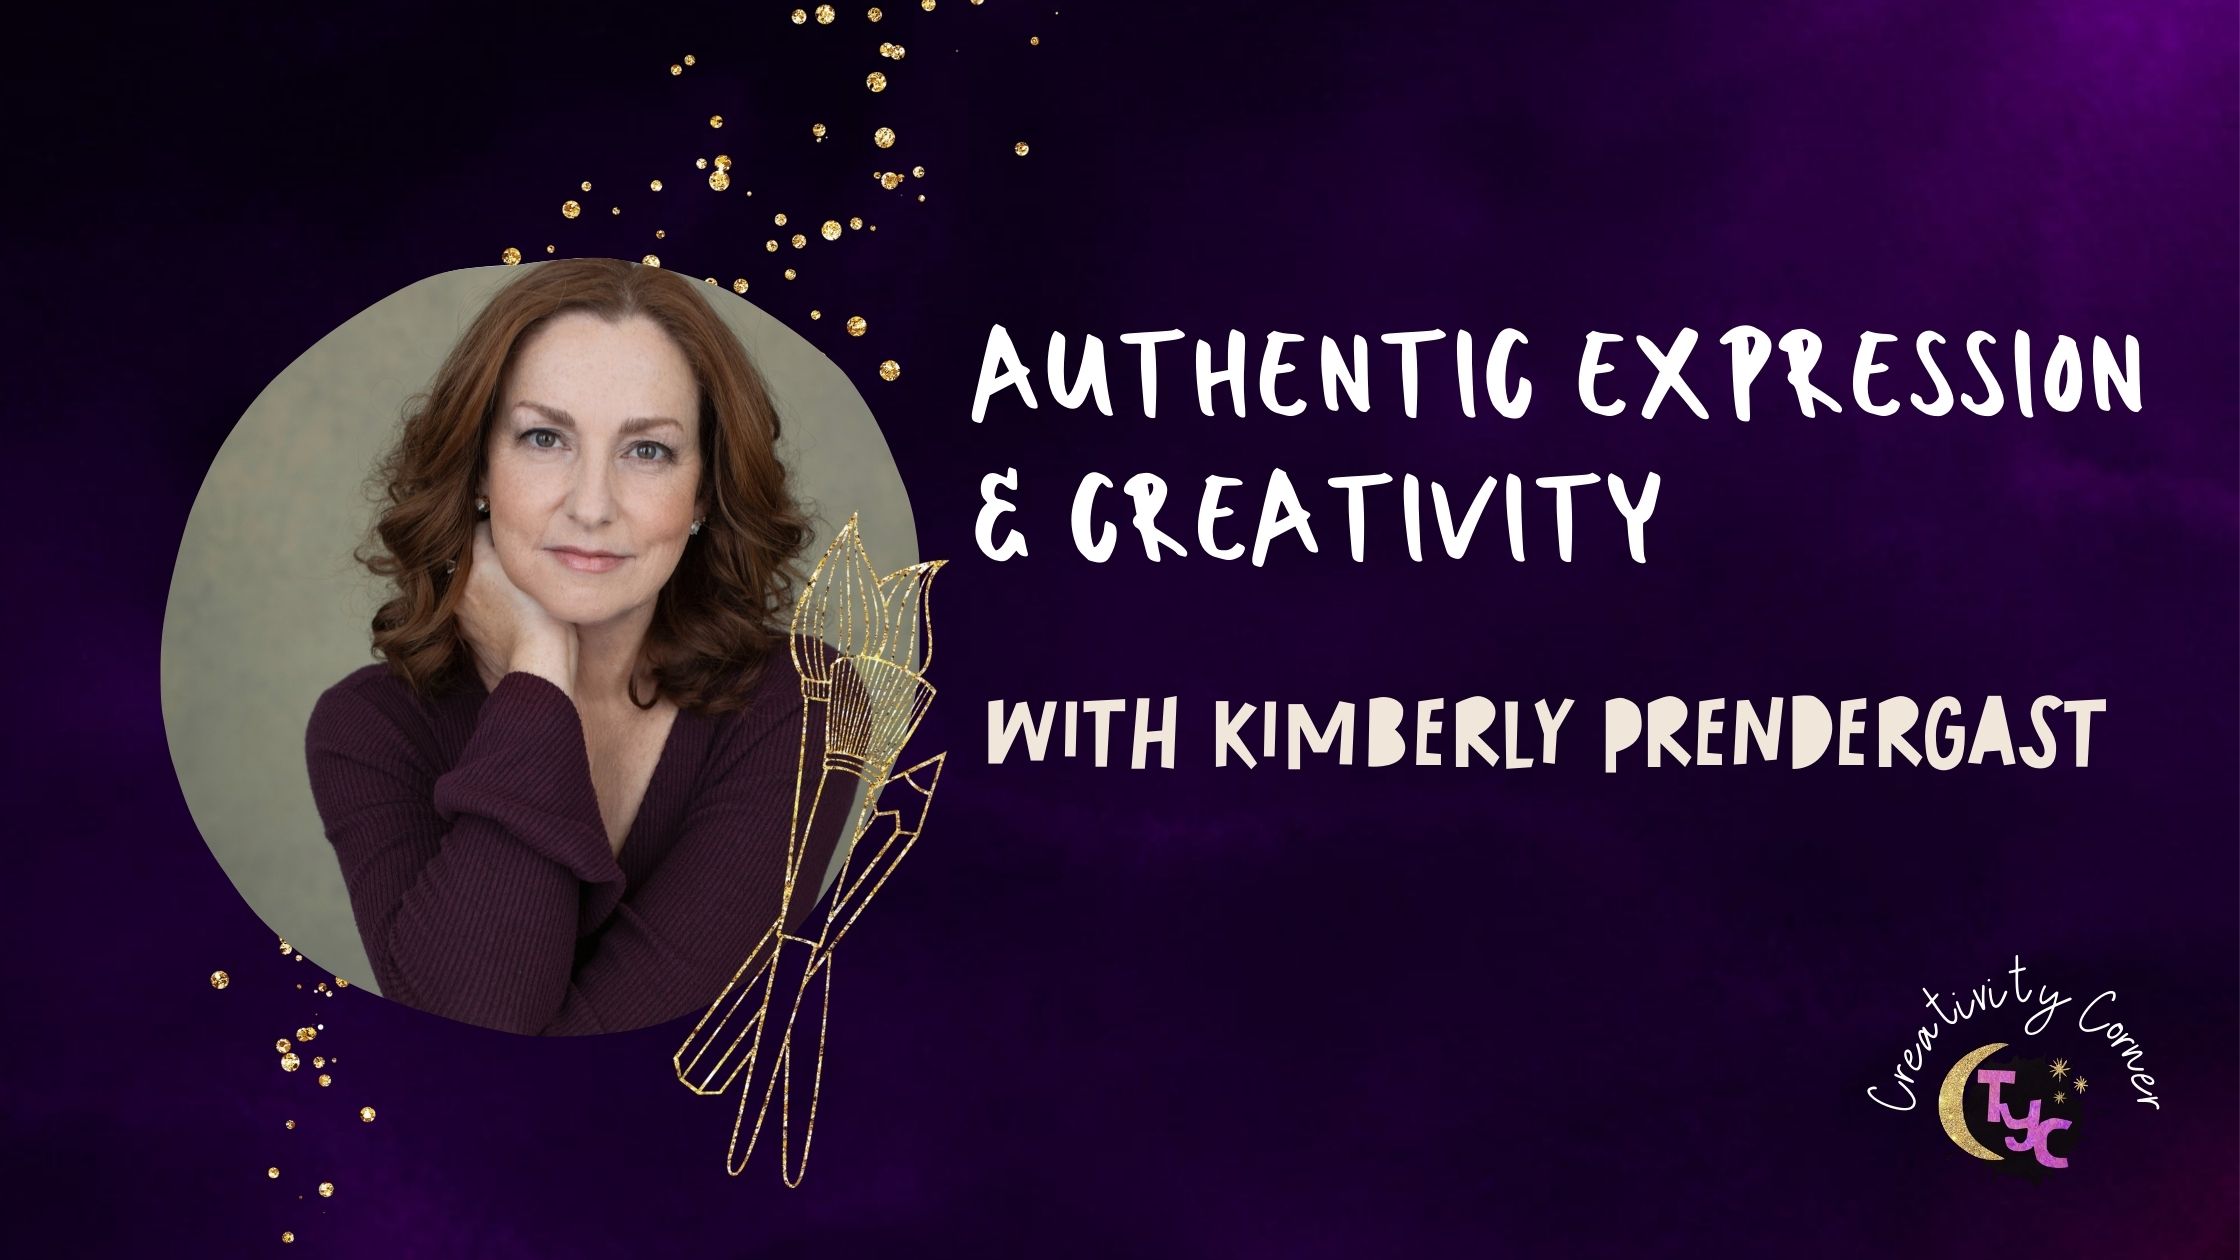 Authentic Expression & Creativity with Kimberly Prendergast